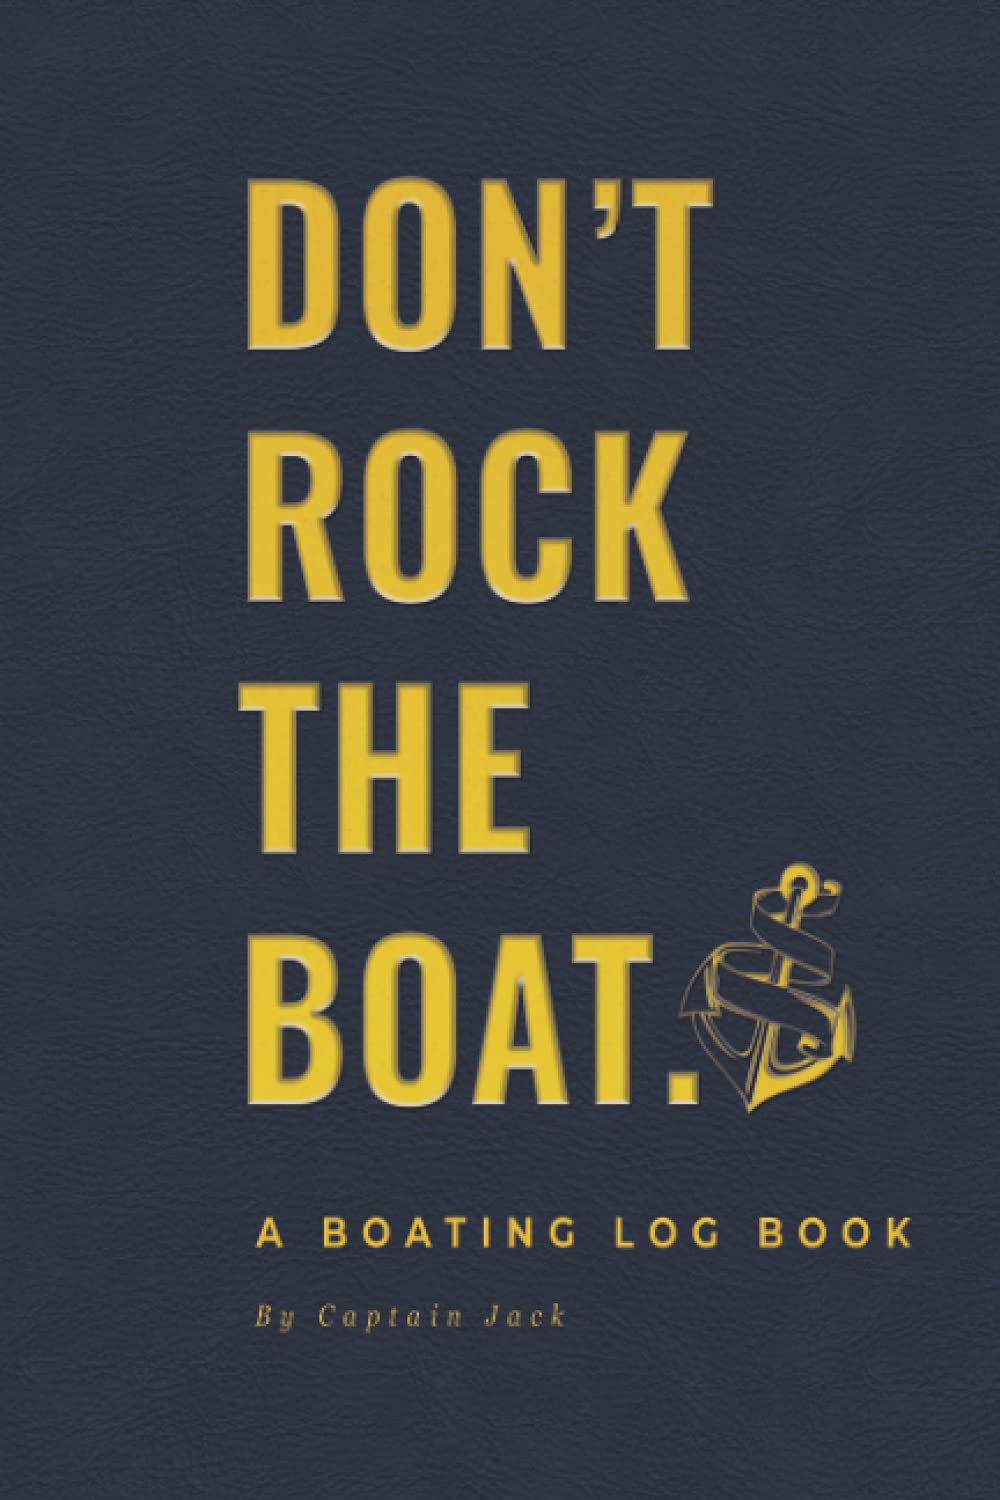 Don't Rock the Boat: A Boating Log Book with Safety Checklists, Trip Logs, Journal Pages, Maintenance Record-Keeping and Important Reference Information